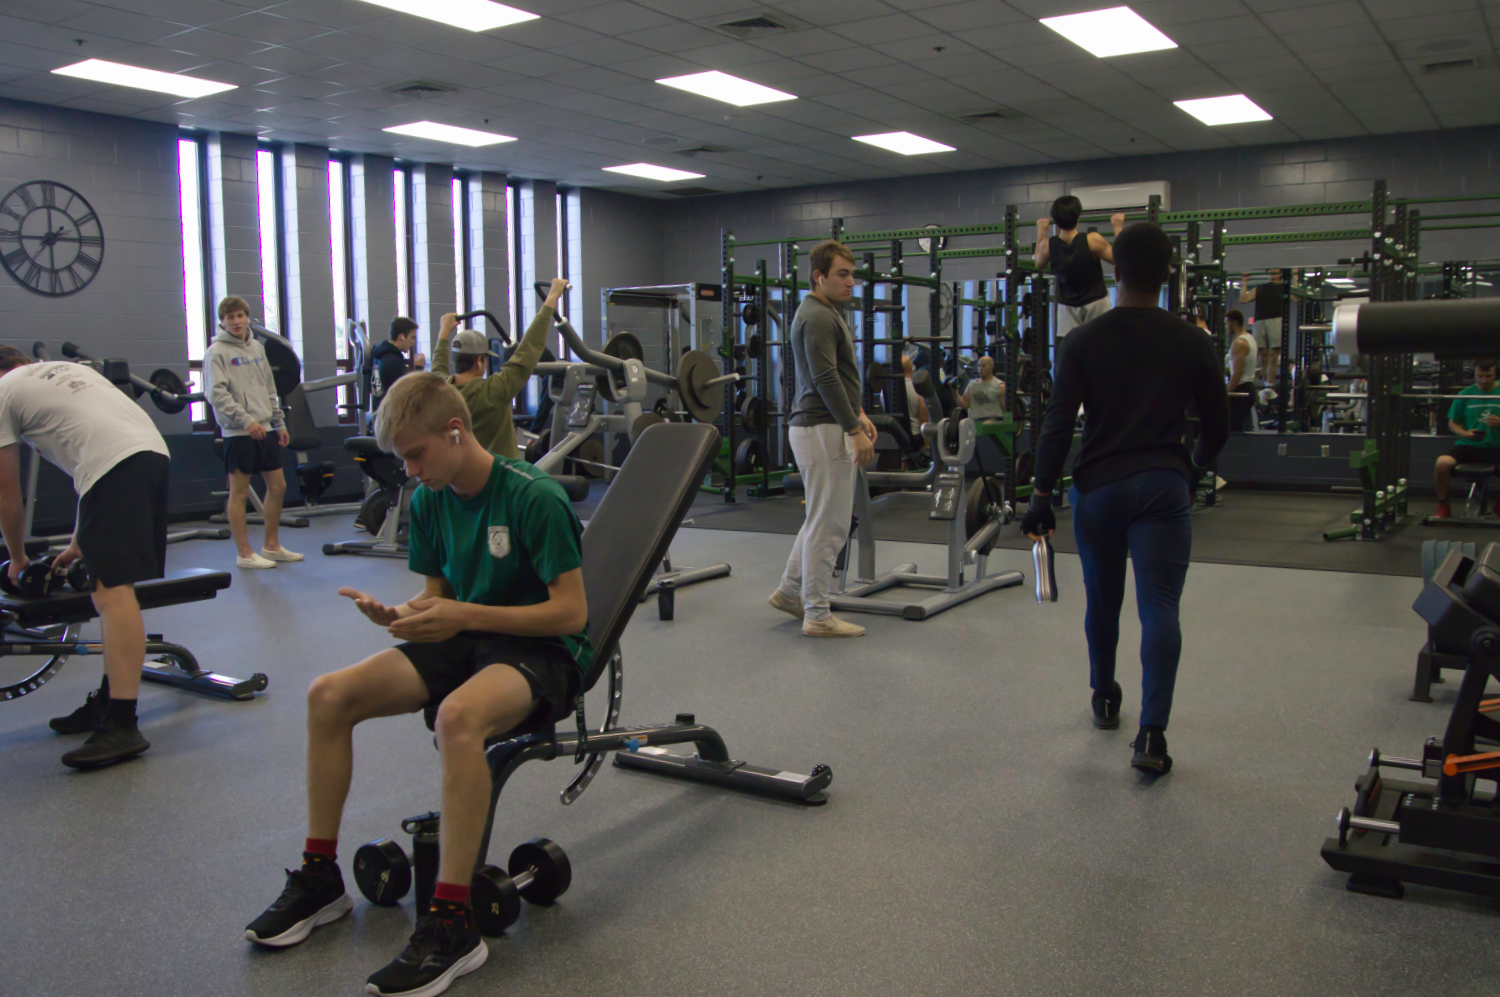 A group of students using equipment in a weight room